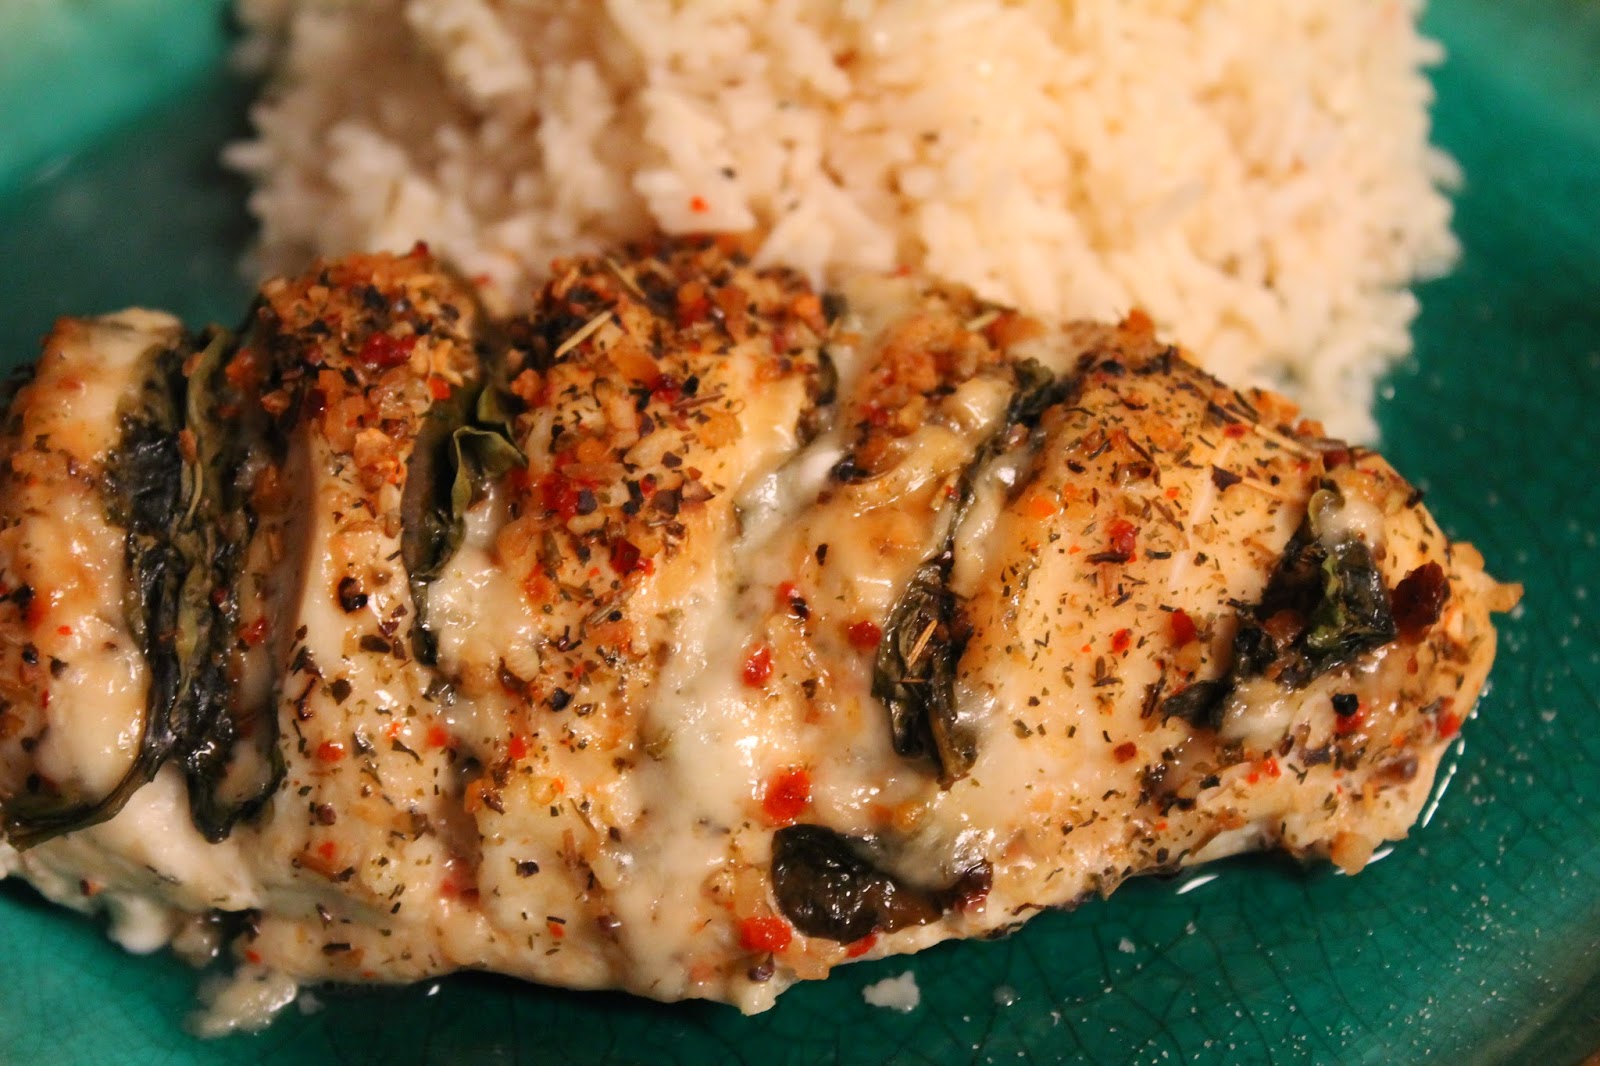 Gluten Free Casually: Spinach & Cheese Stuffed Chicken